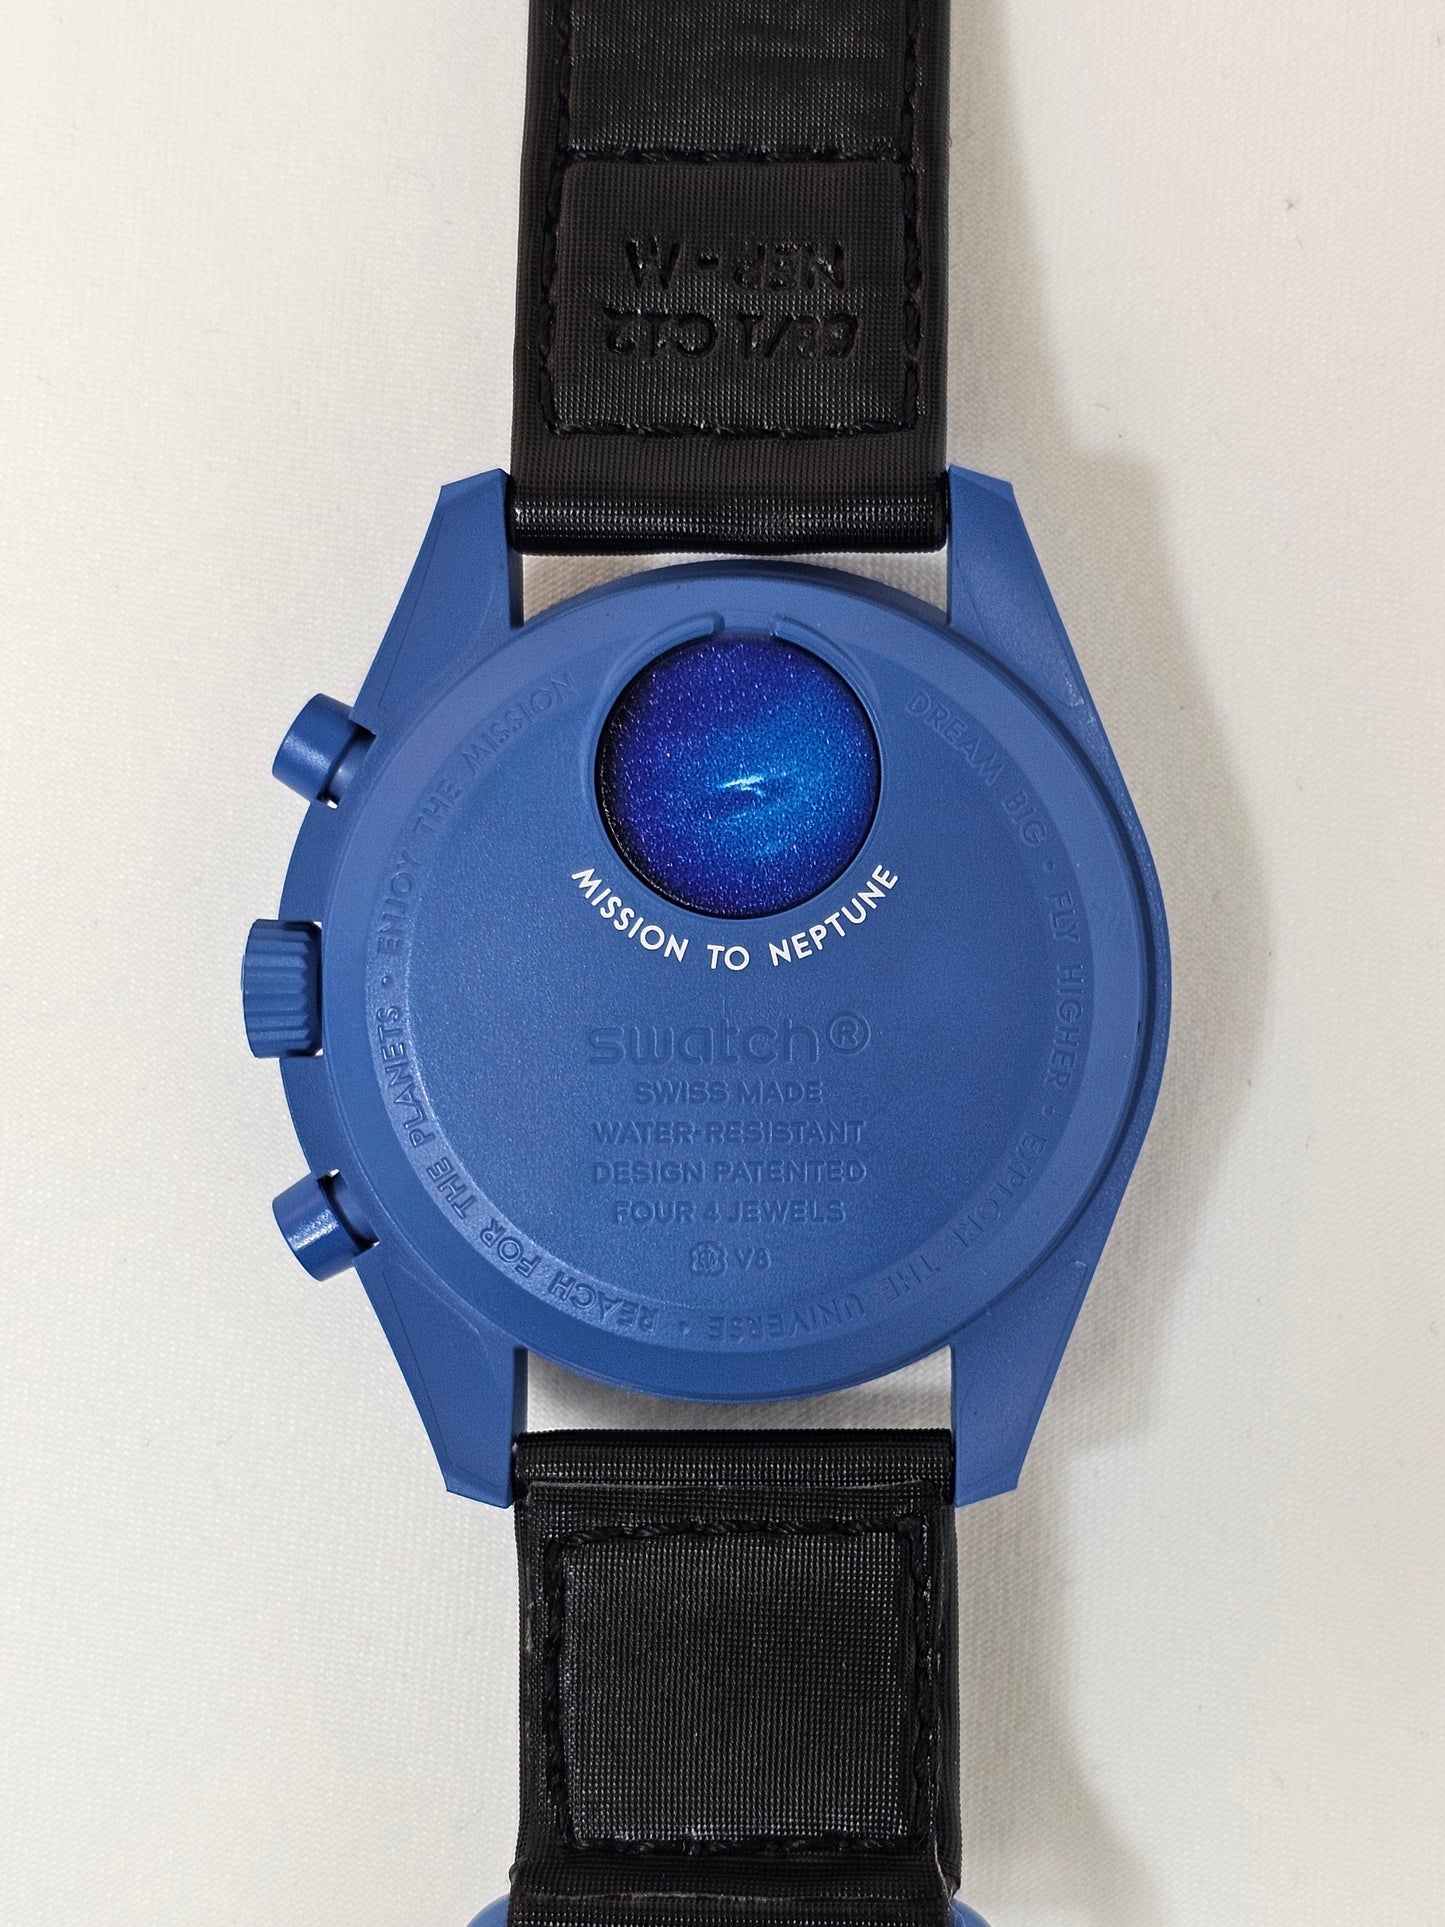 Swatch Moonswatch: Mission to Neptune - Etherial cosmic beauty